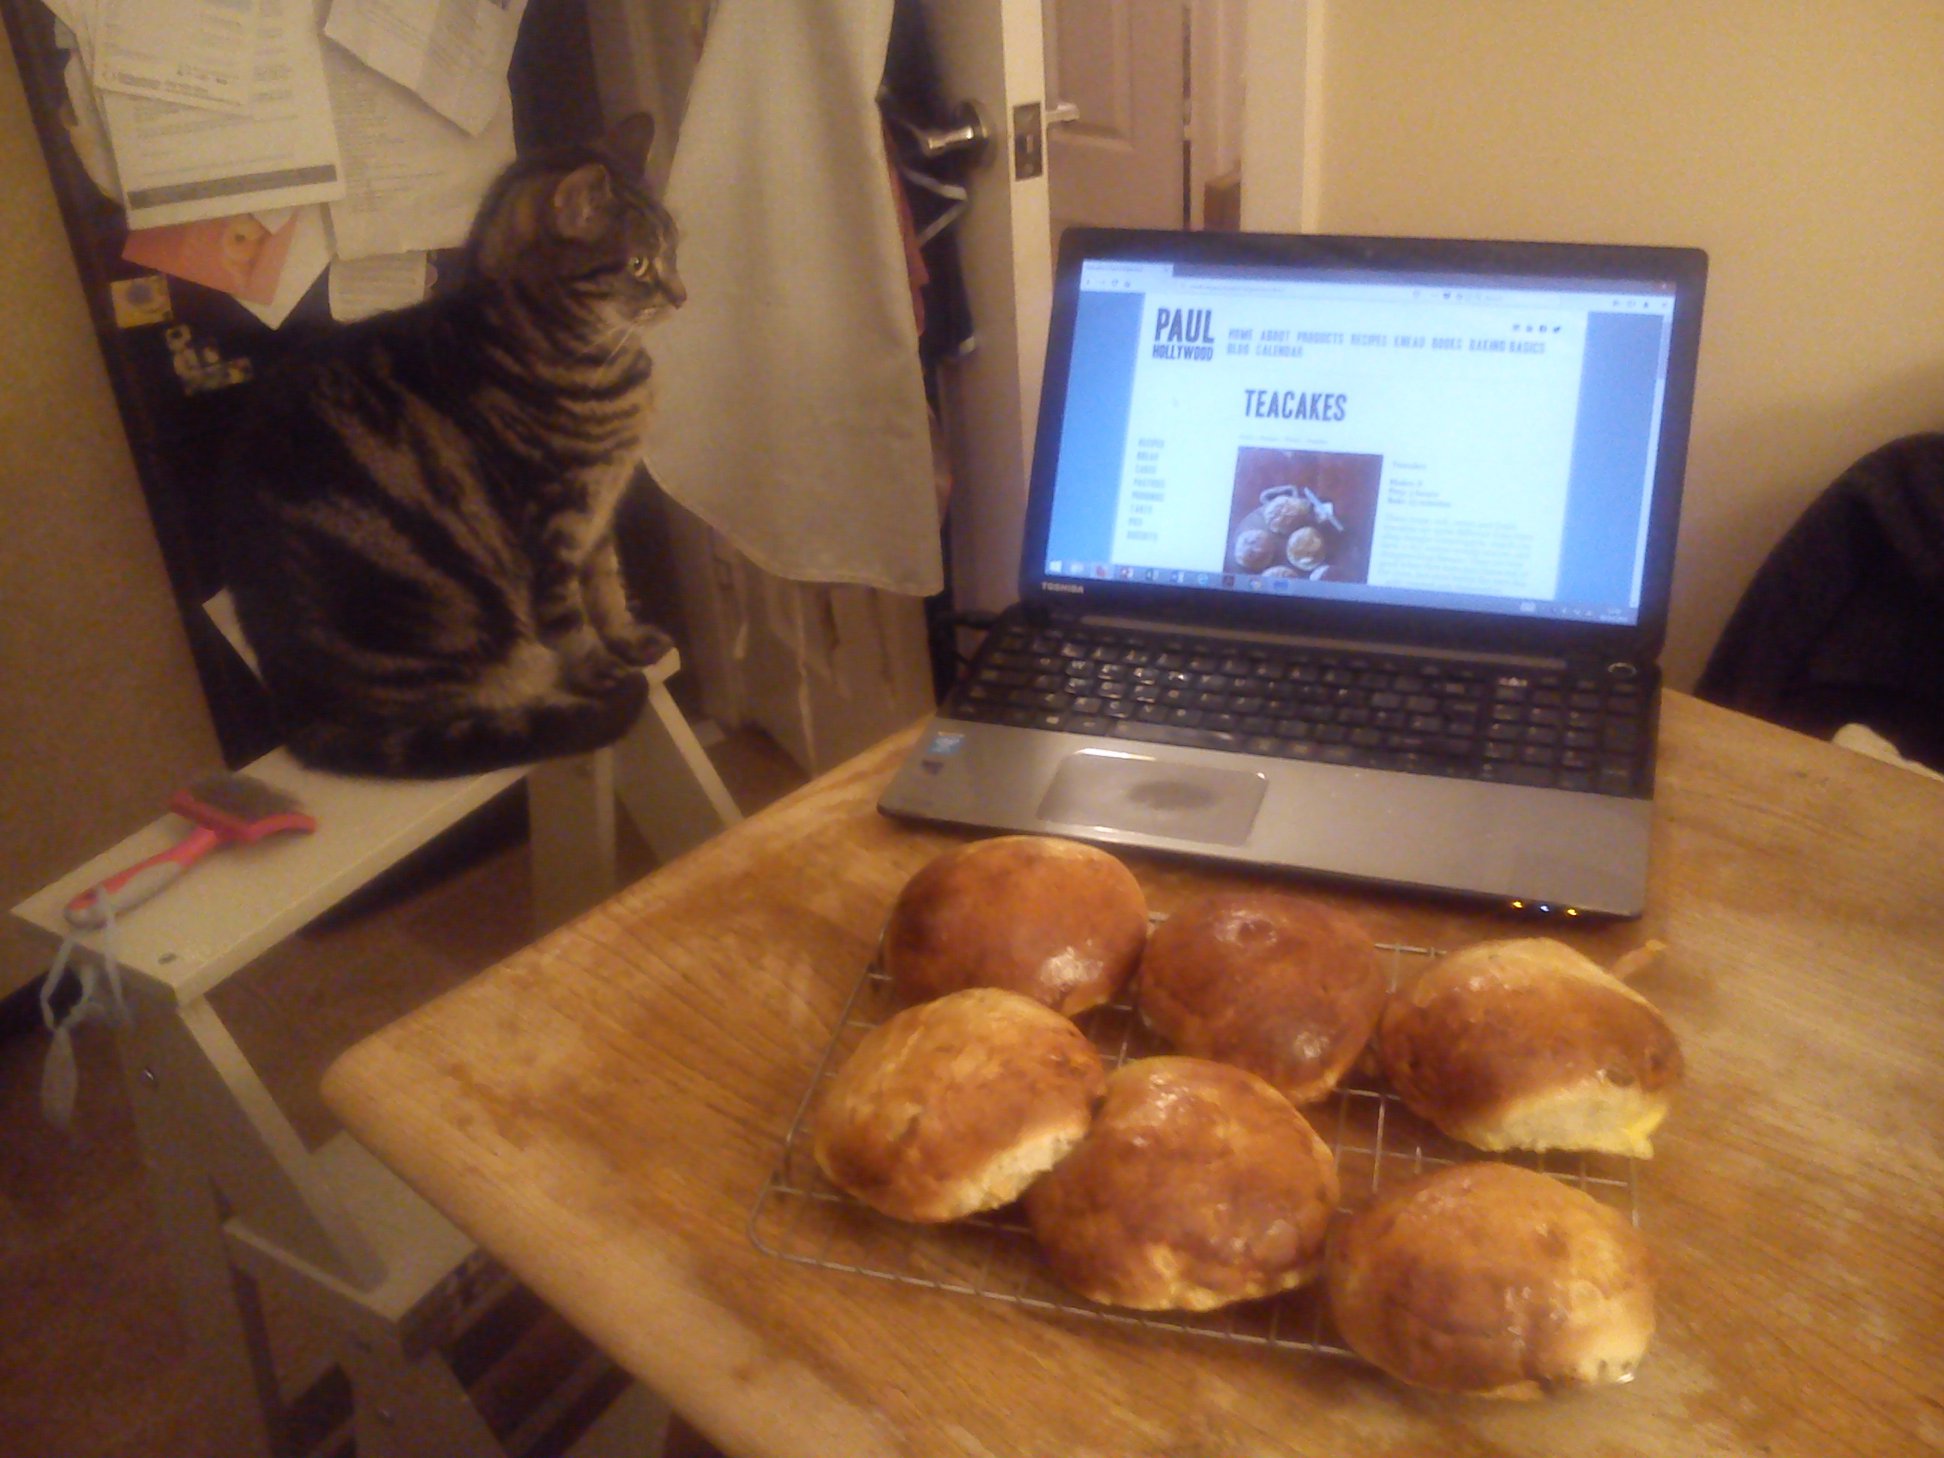 Laptop with tabby cat and a rack of teacakes